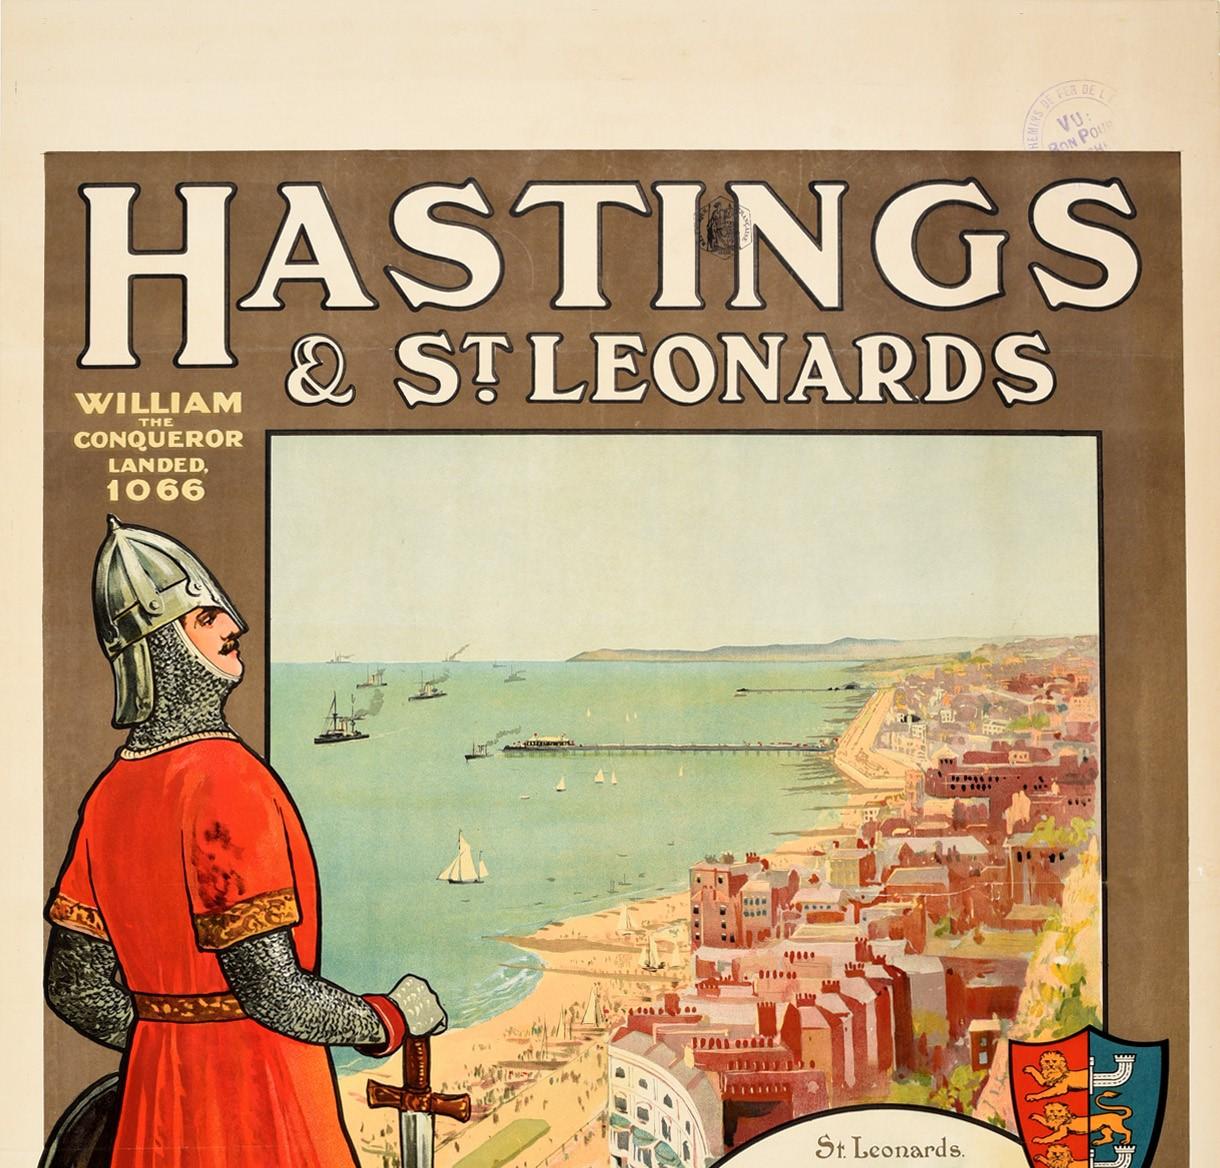 Original antique travel poster advertising the historical South Coast towns of Hastings and St Leonards for Health Scenery & Sunshine all year round Four miles of parade & sea front - featuring a great design depicting a scenic seaside view entitled